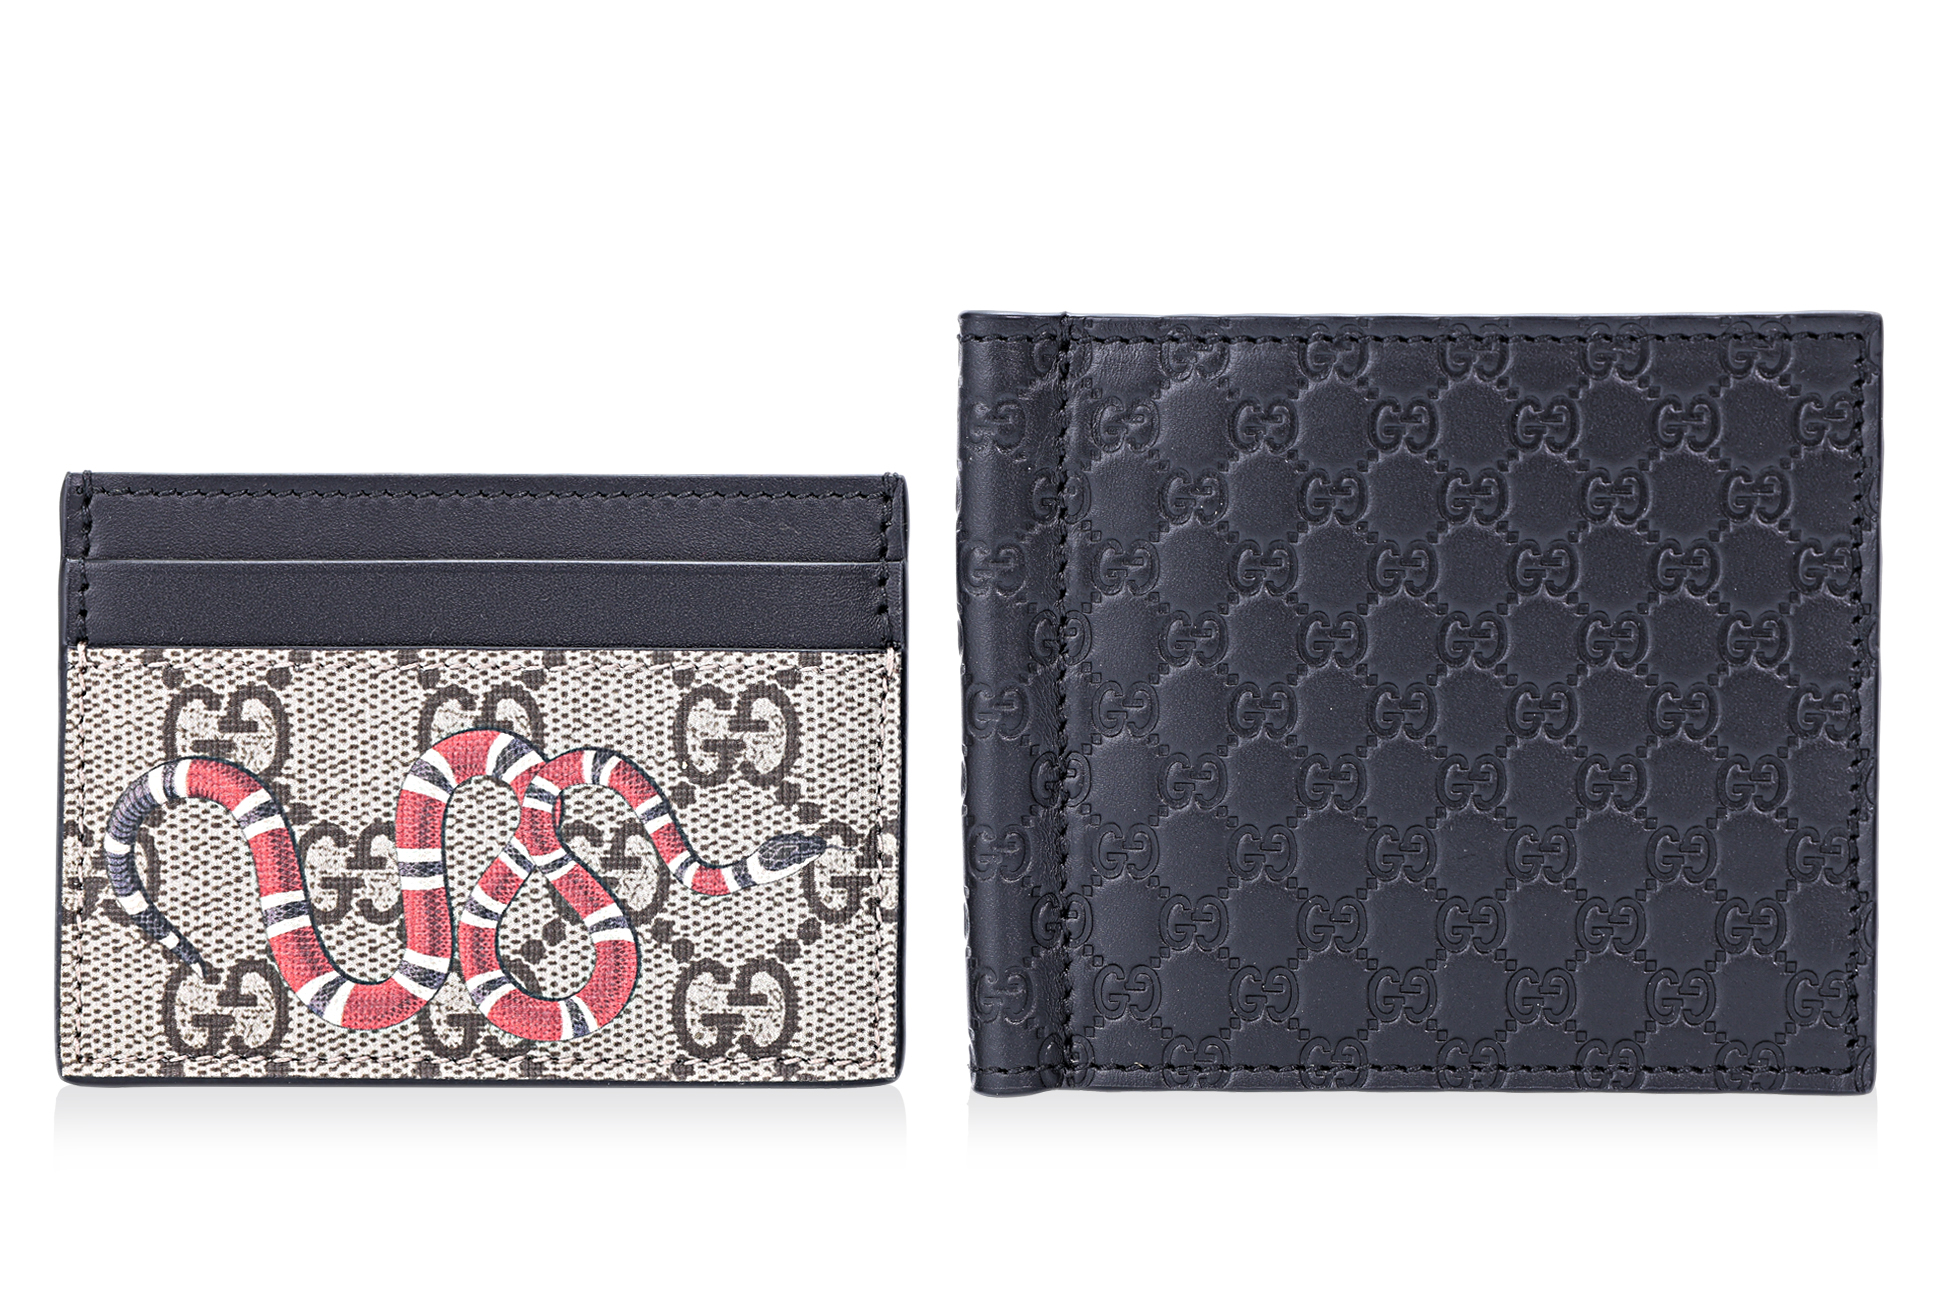 A GUCCI CARDHOLDER AND EMBOSSED WALLET WITH MONEY CLIP - Image 2 of 5